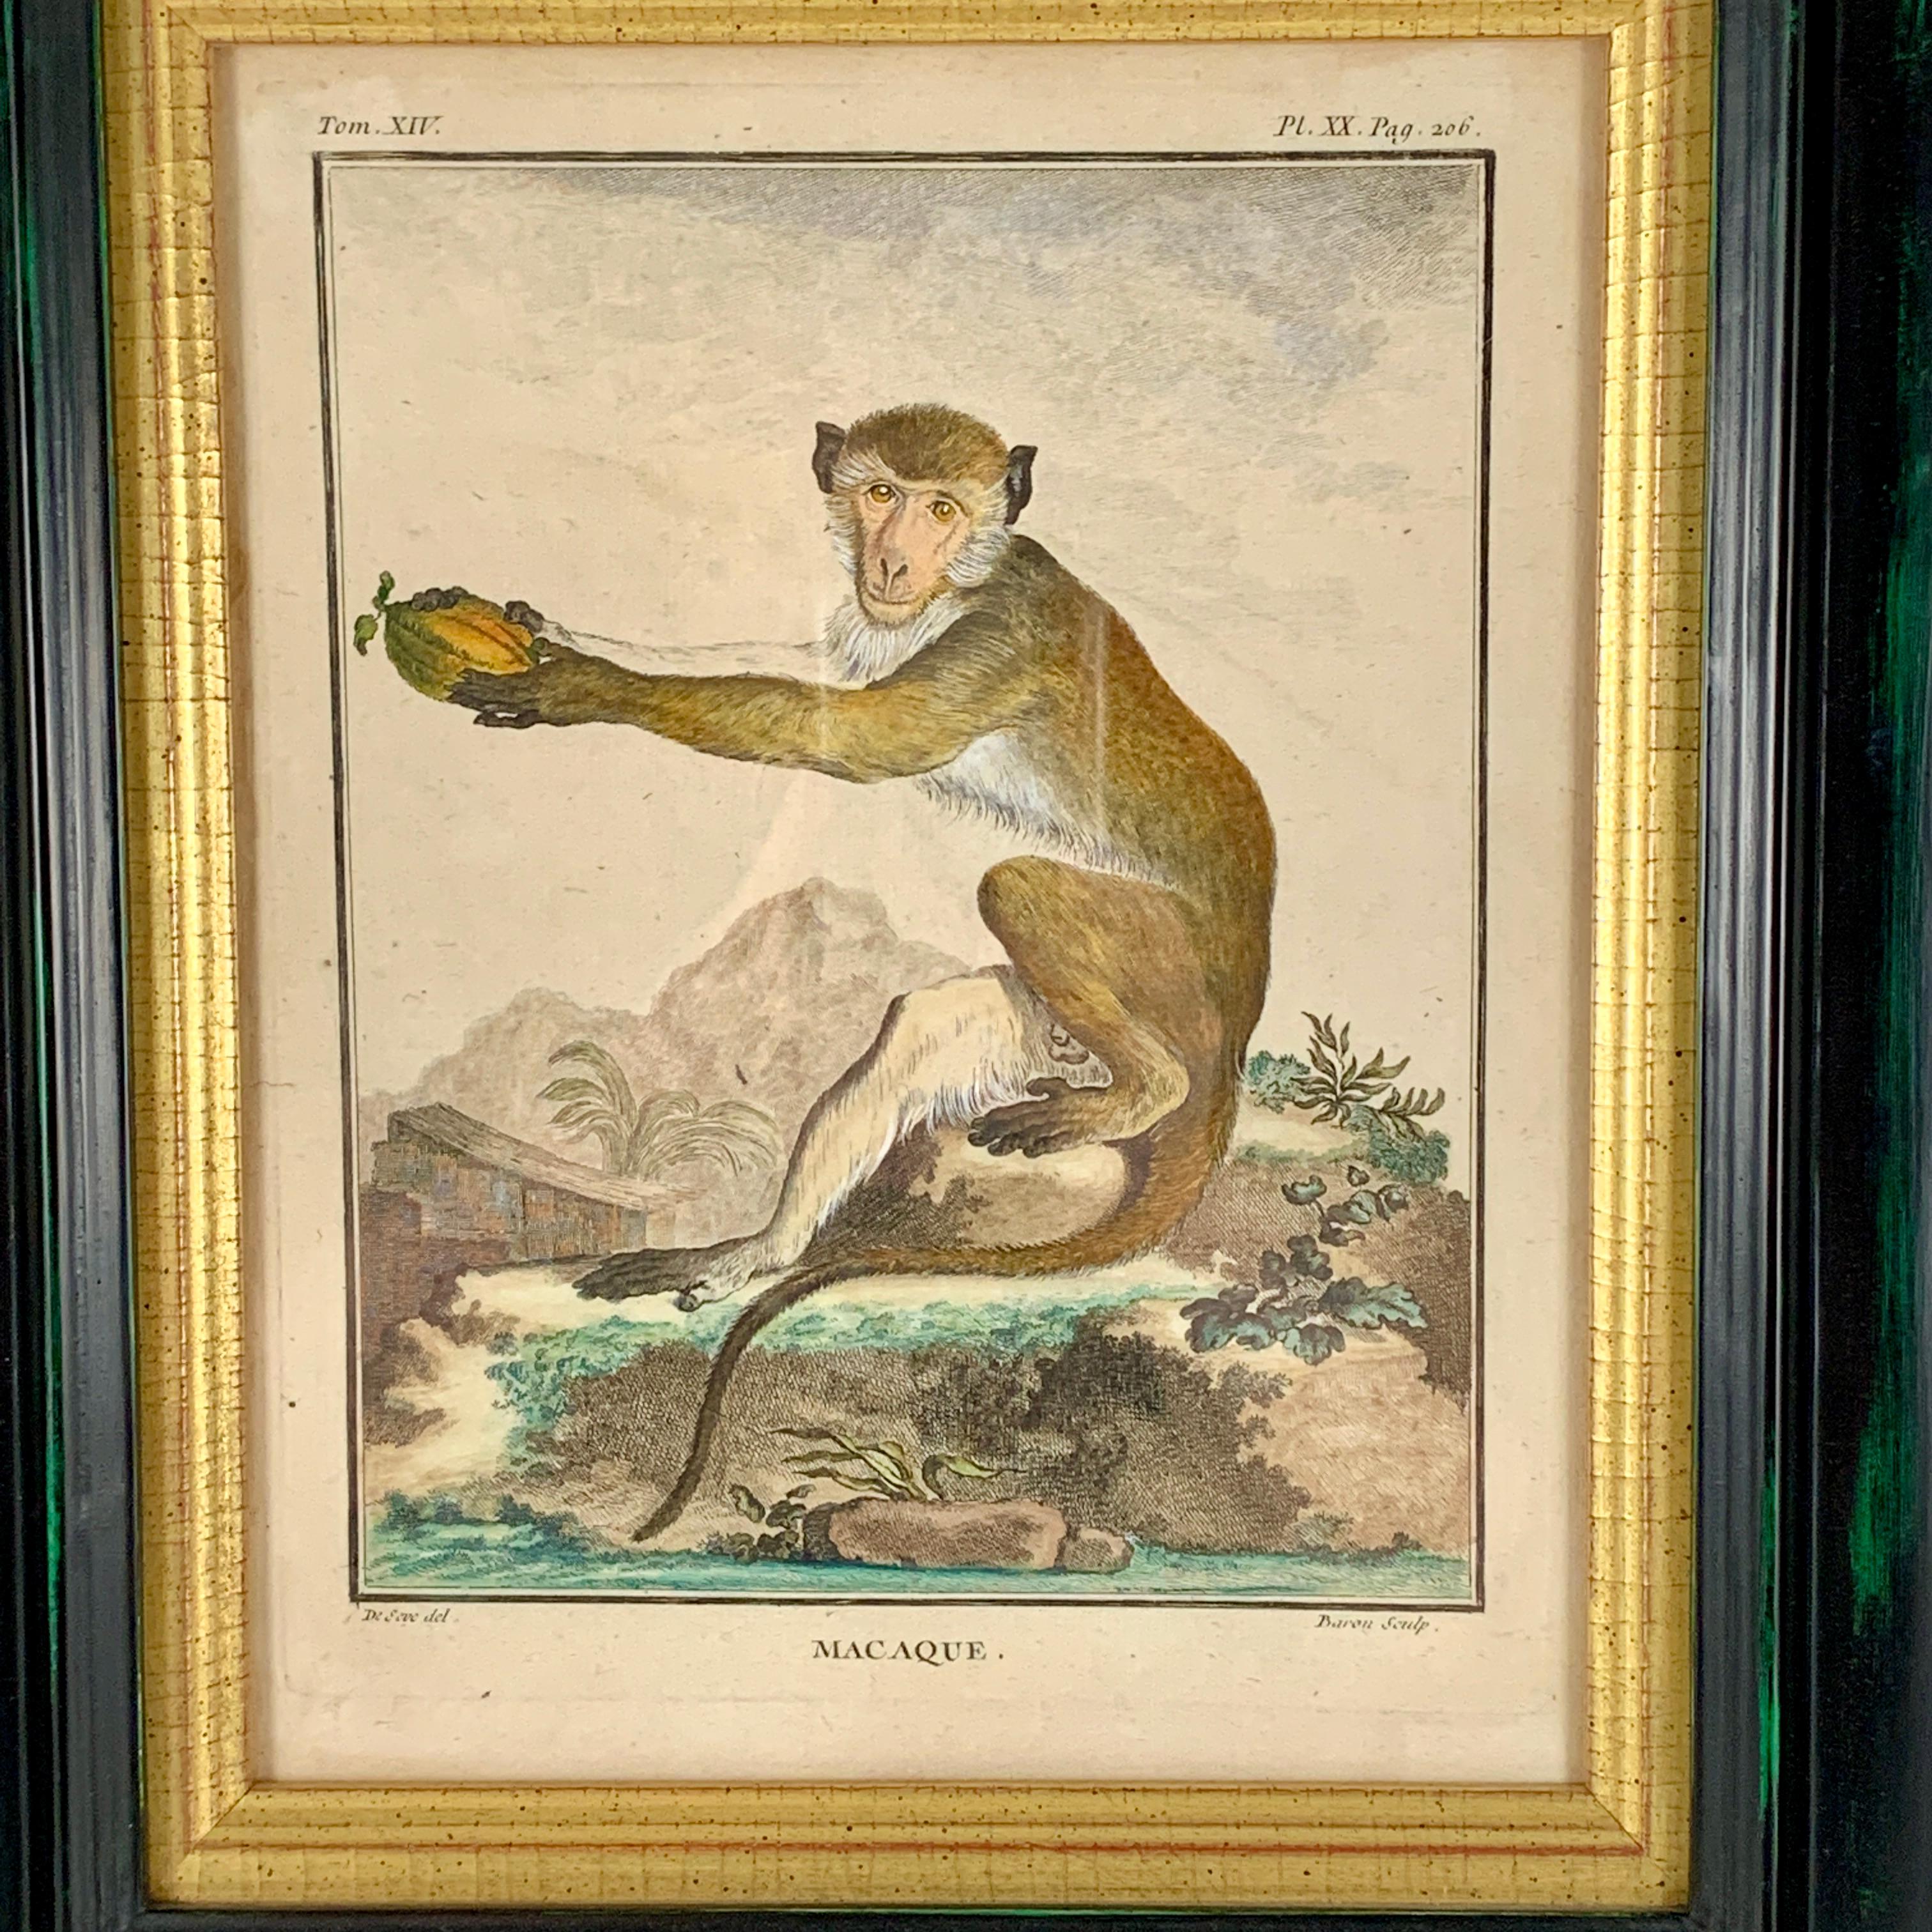 A beautifully framed Monkey Plate from the Buffon Comte de Quadrúpedes series by Georges-Louis Leclerc, France – circa 1770.

A copper plate, hand-colored engraving titled, Macaque, from the “Histoire Naturelle, Generale et Particuliere.” A Macaque